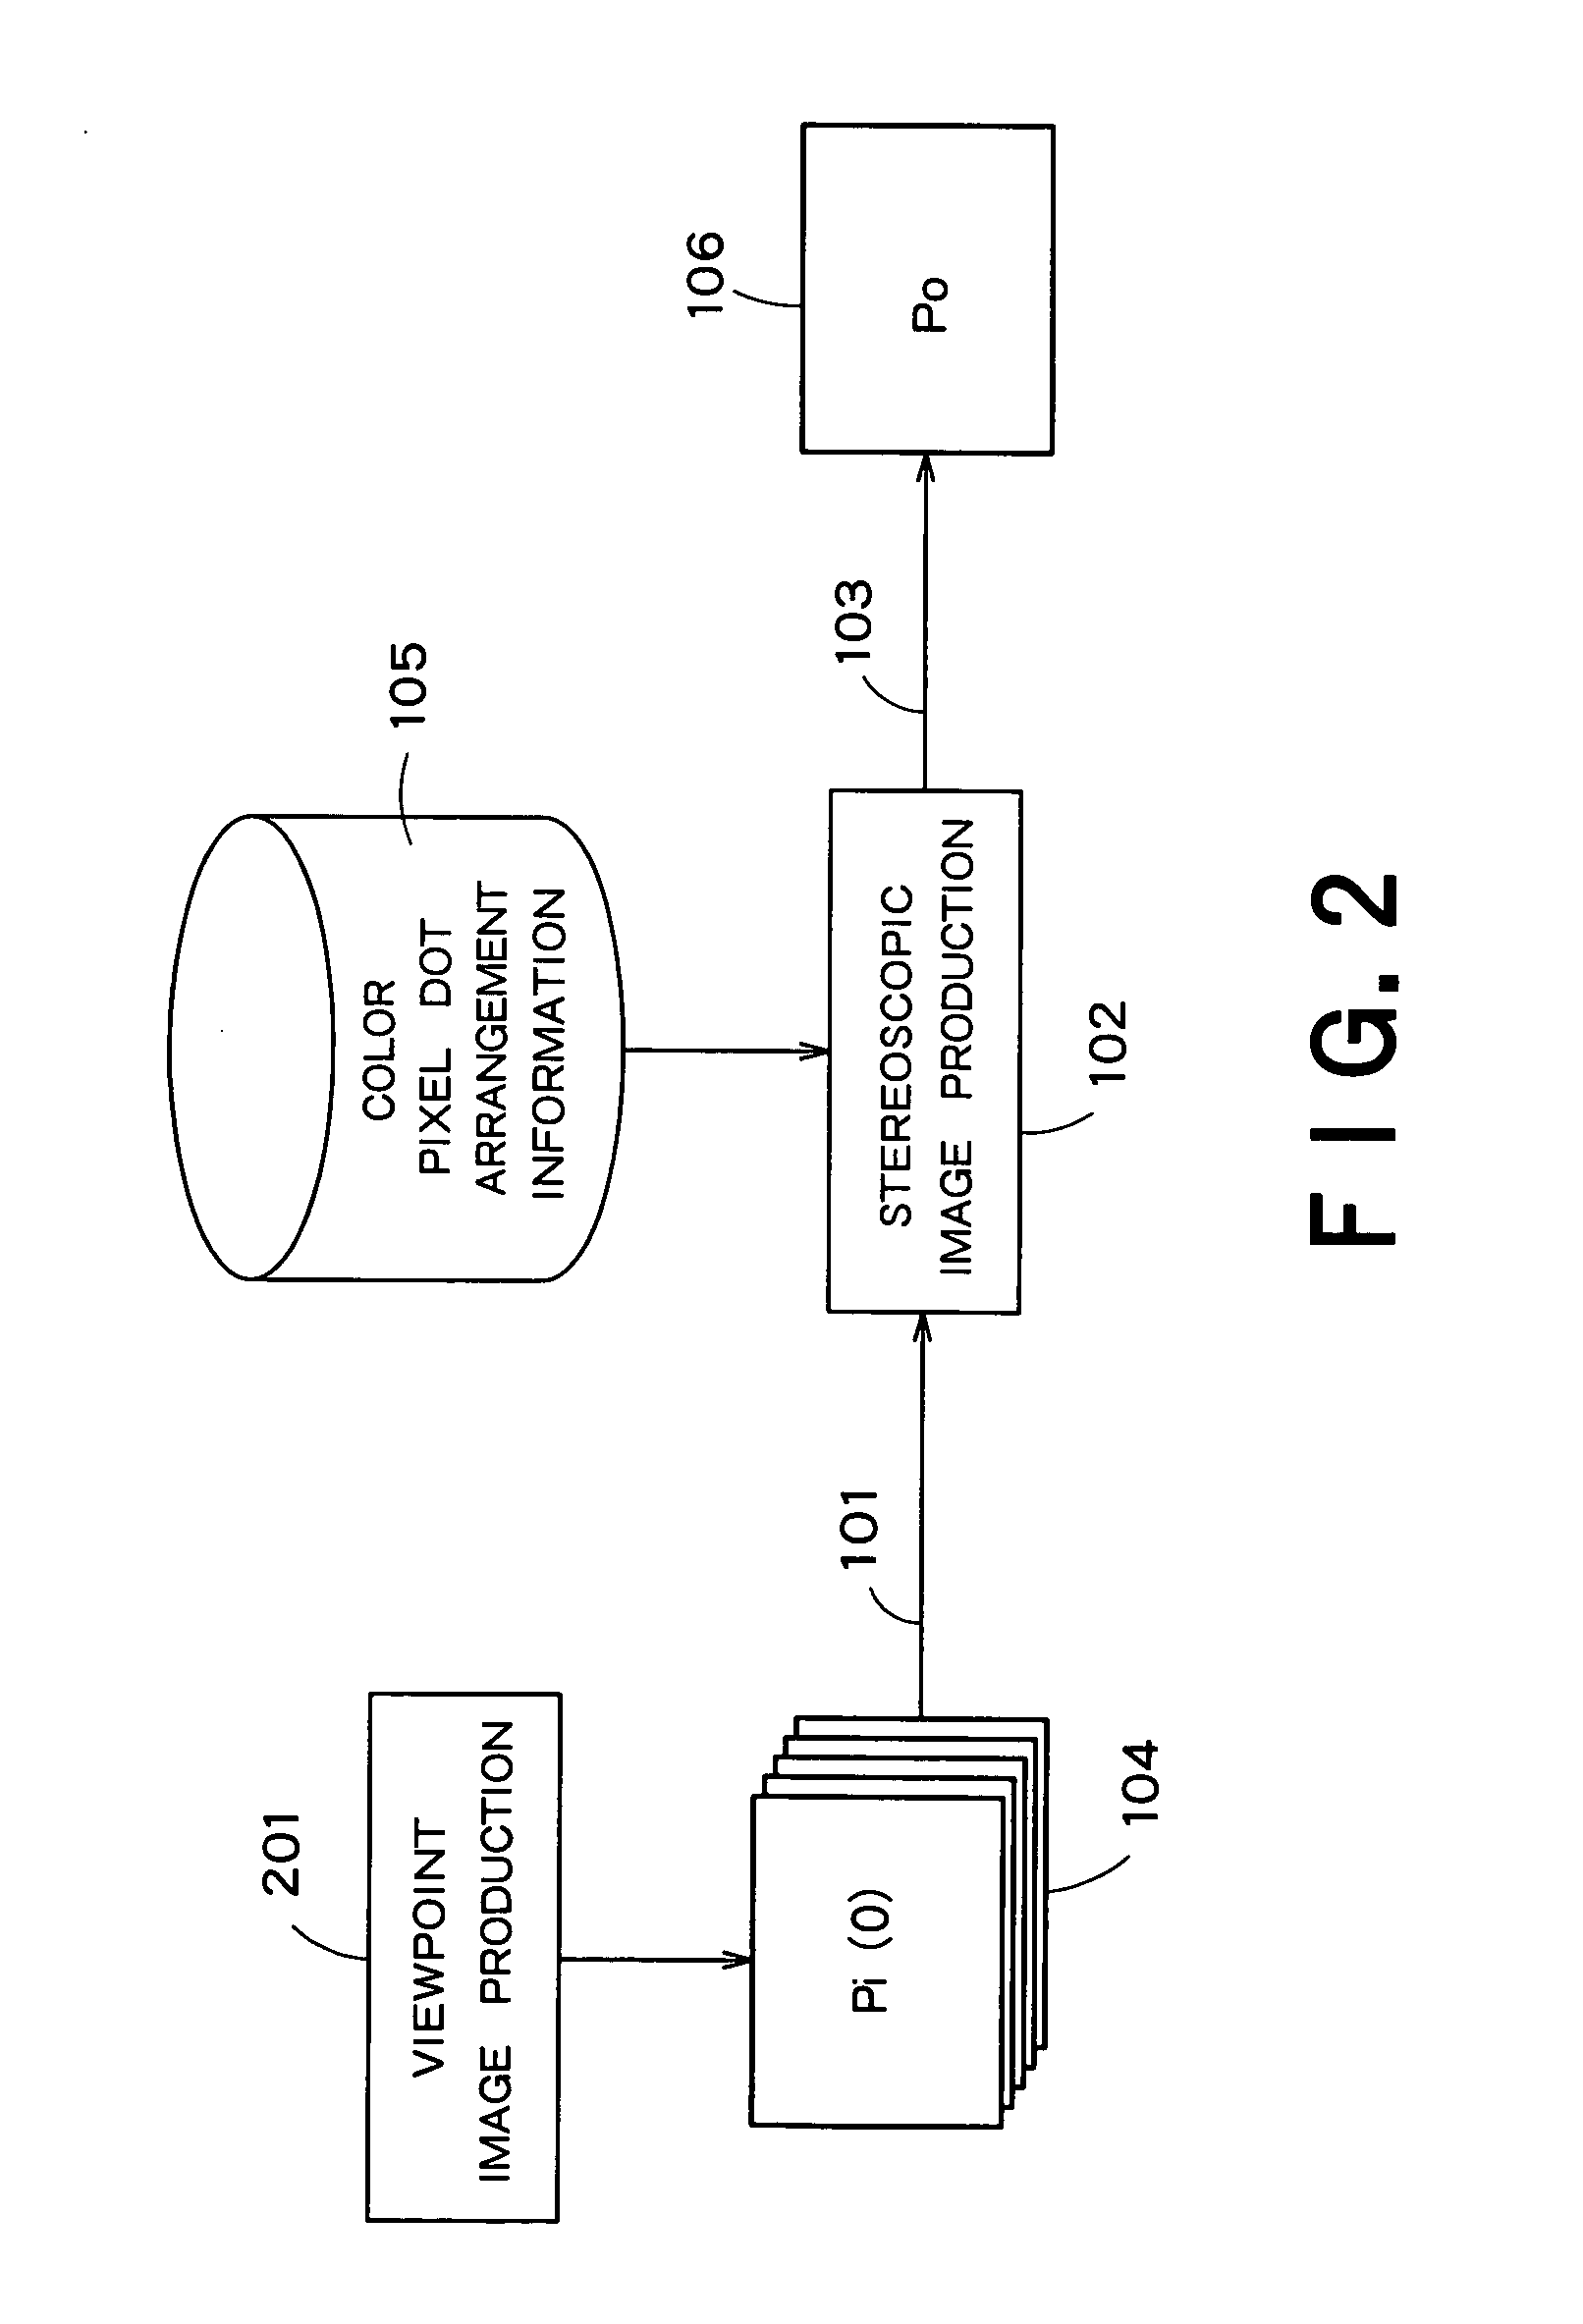 Stereoscopic image producing method and stereoscopic image display device